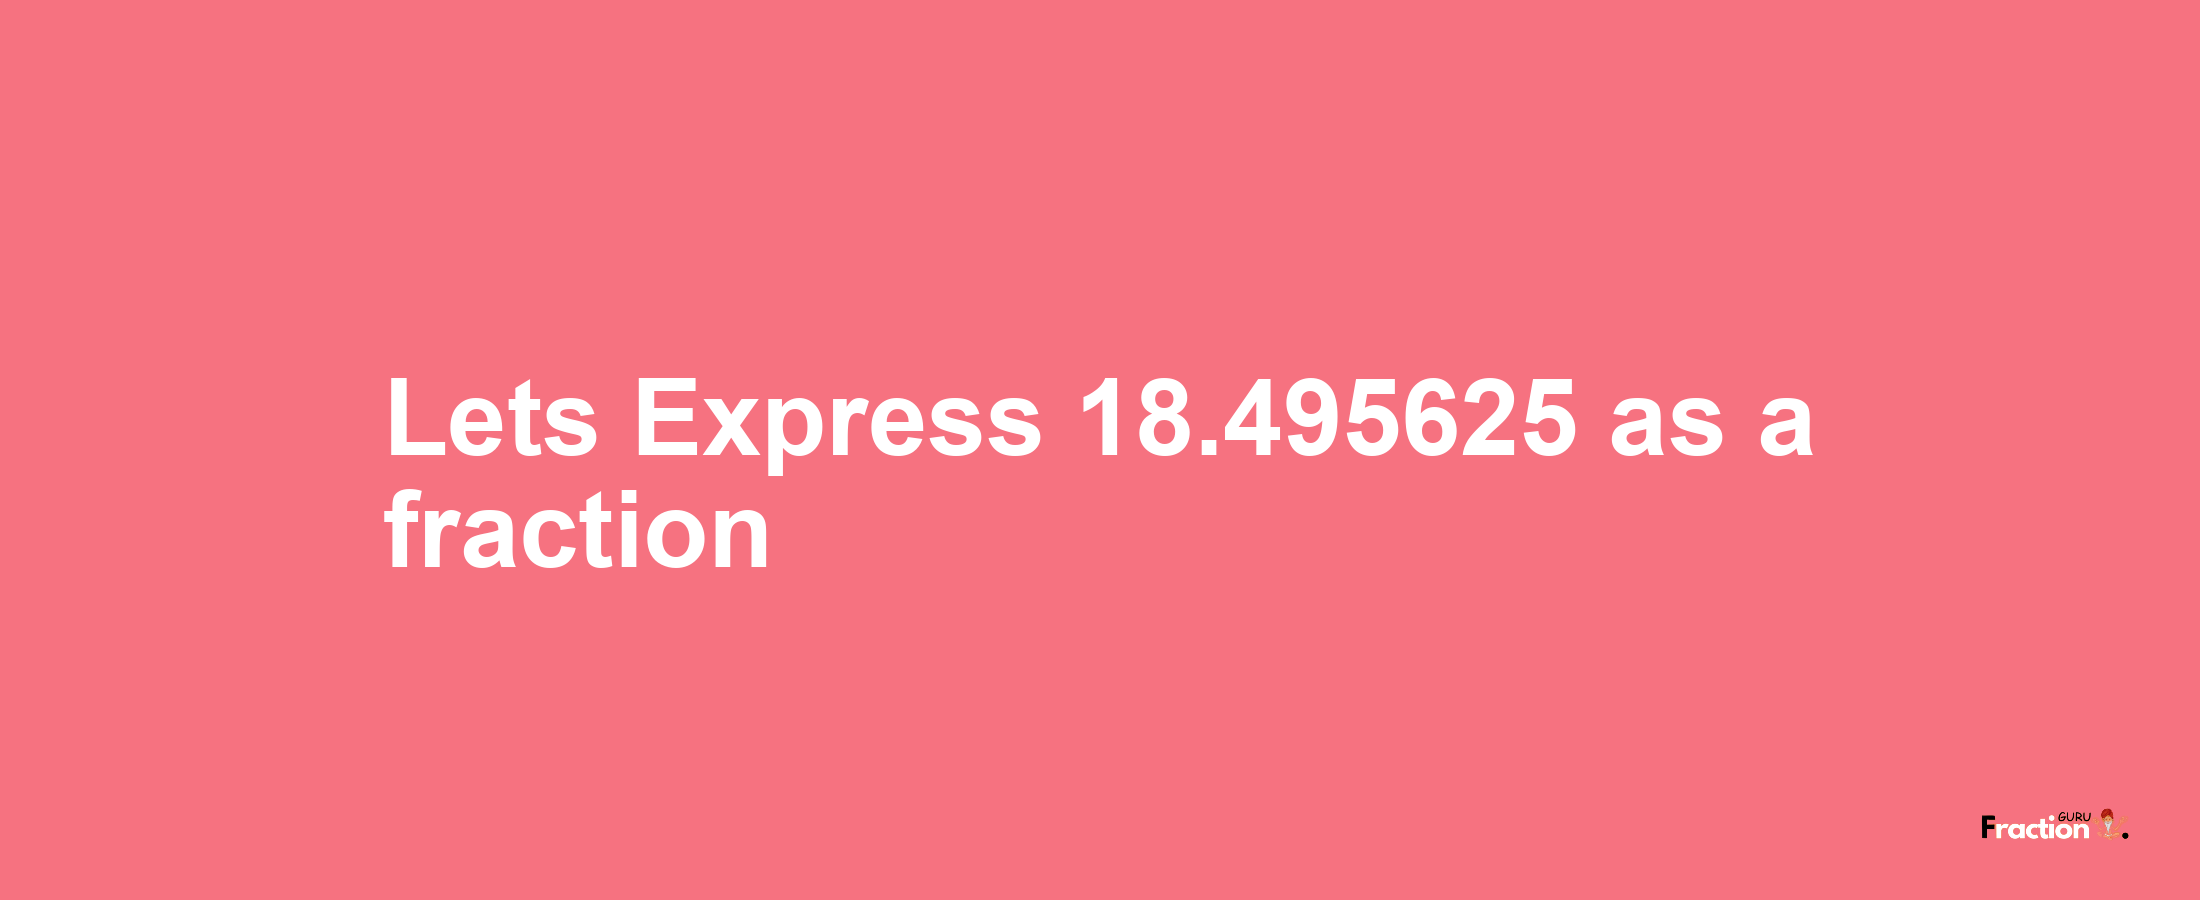 Lets Express 18.495625 as afraction